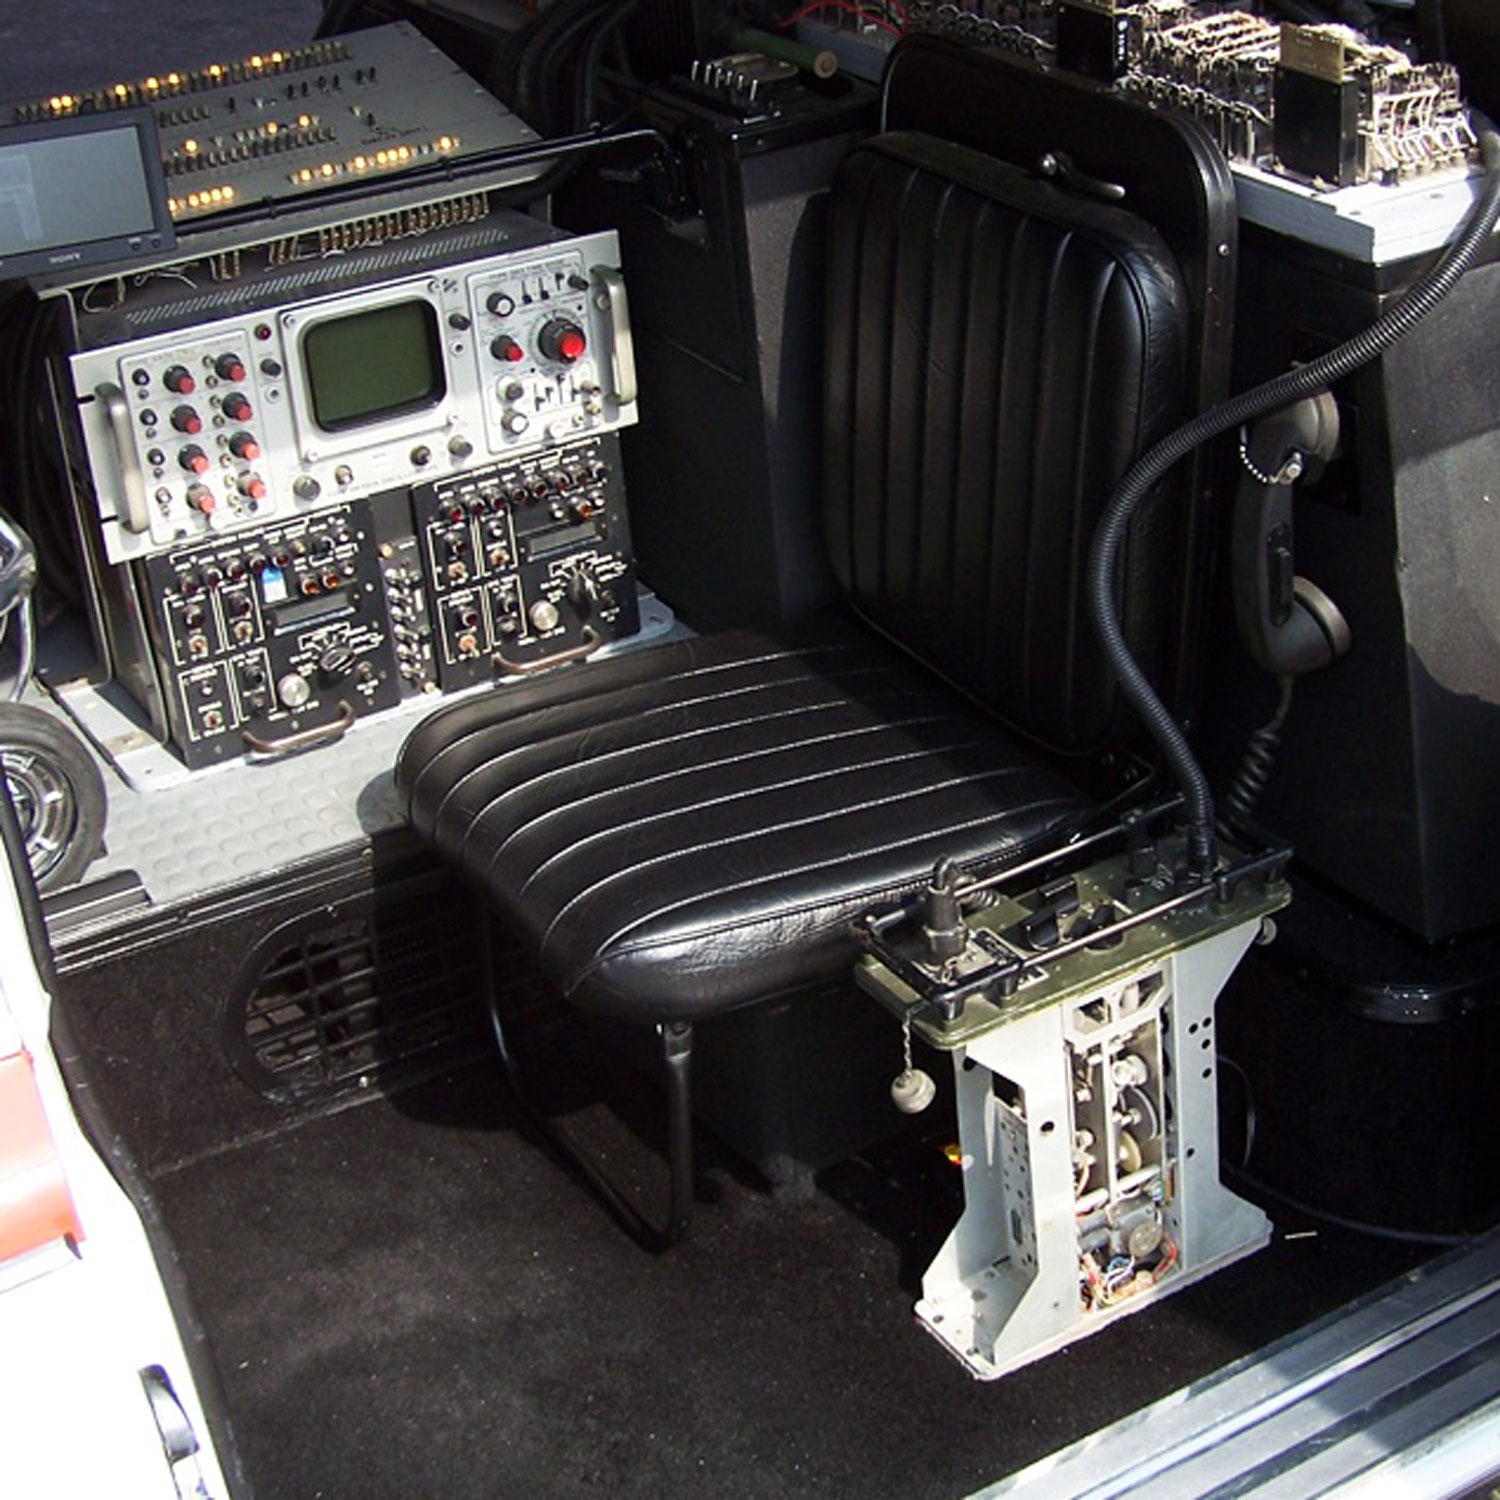 Ecto-1 jump seat from Ghostbusters movie